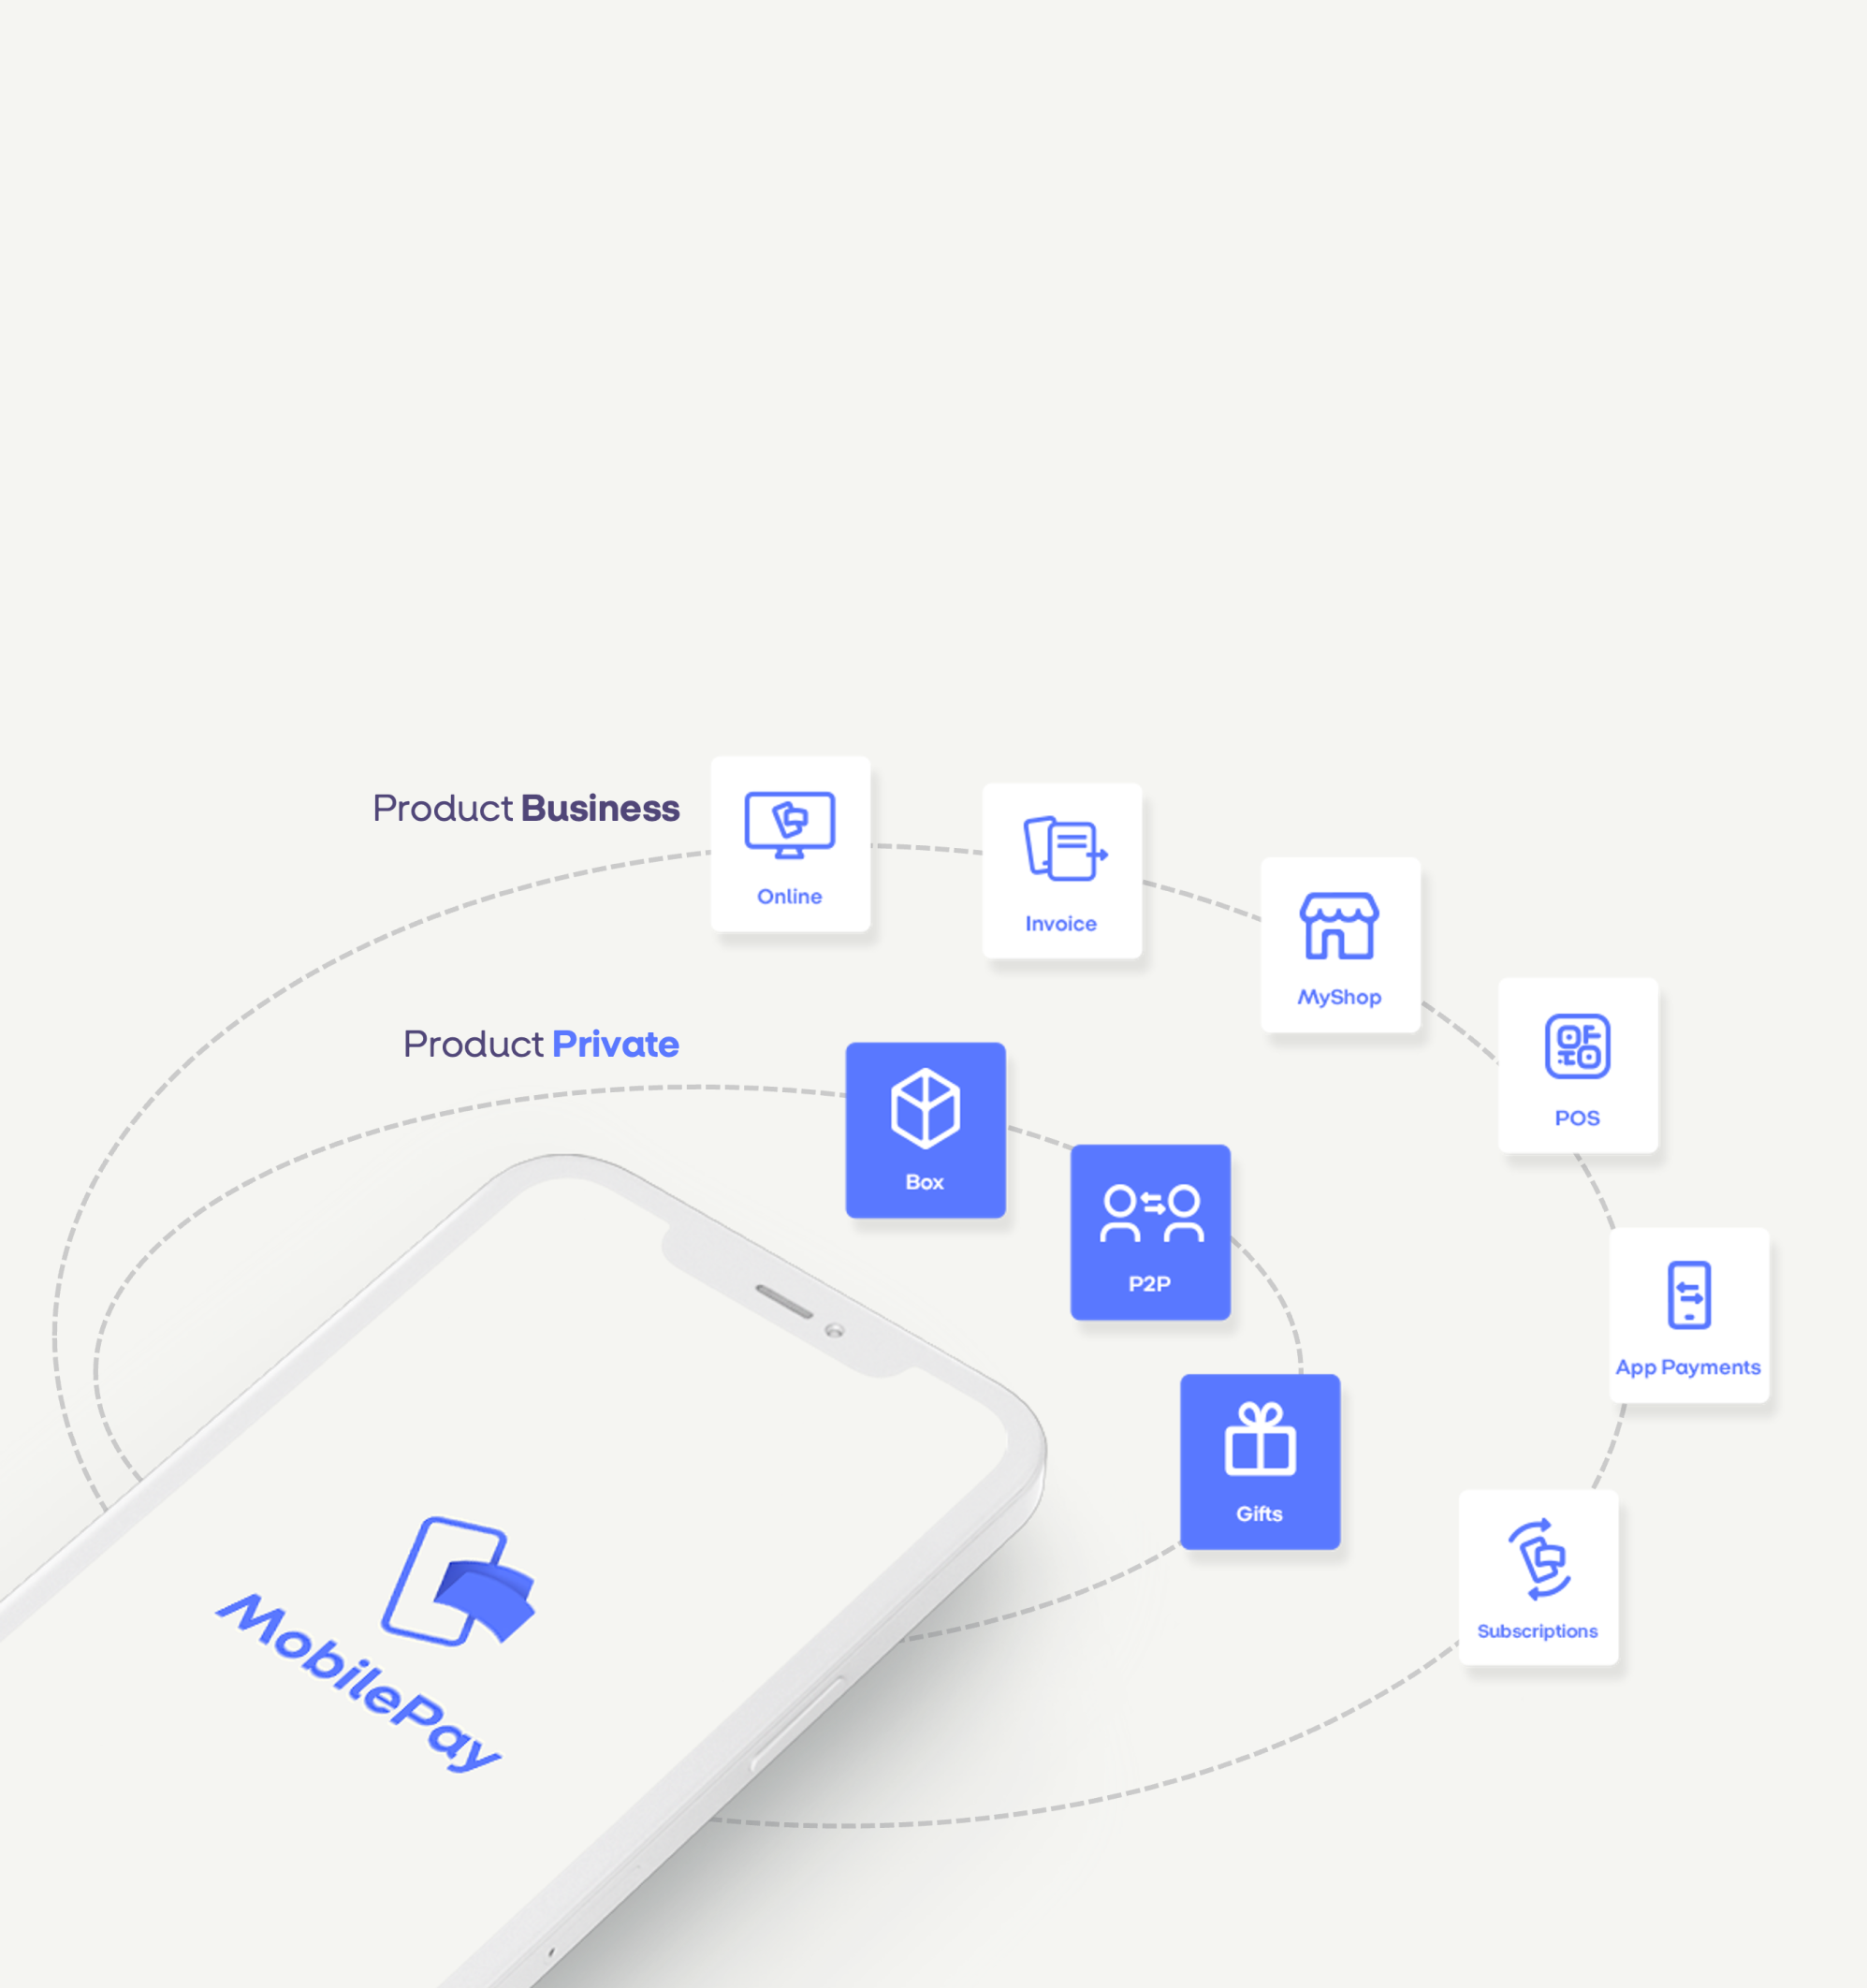 Image that shows overview of all MobilePays products.